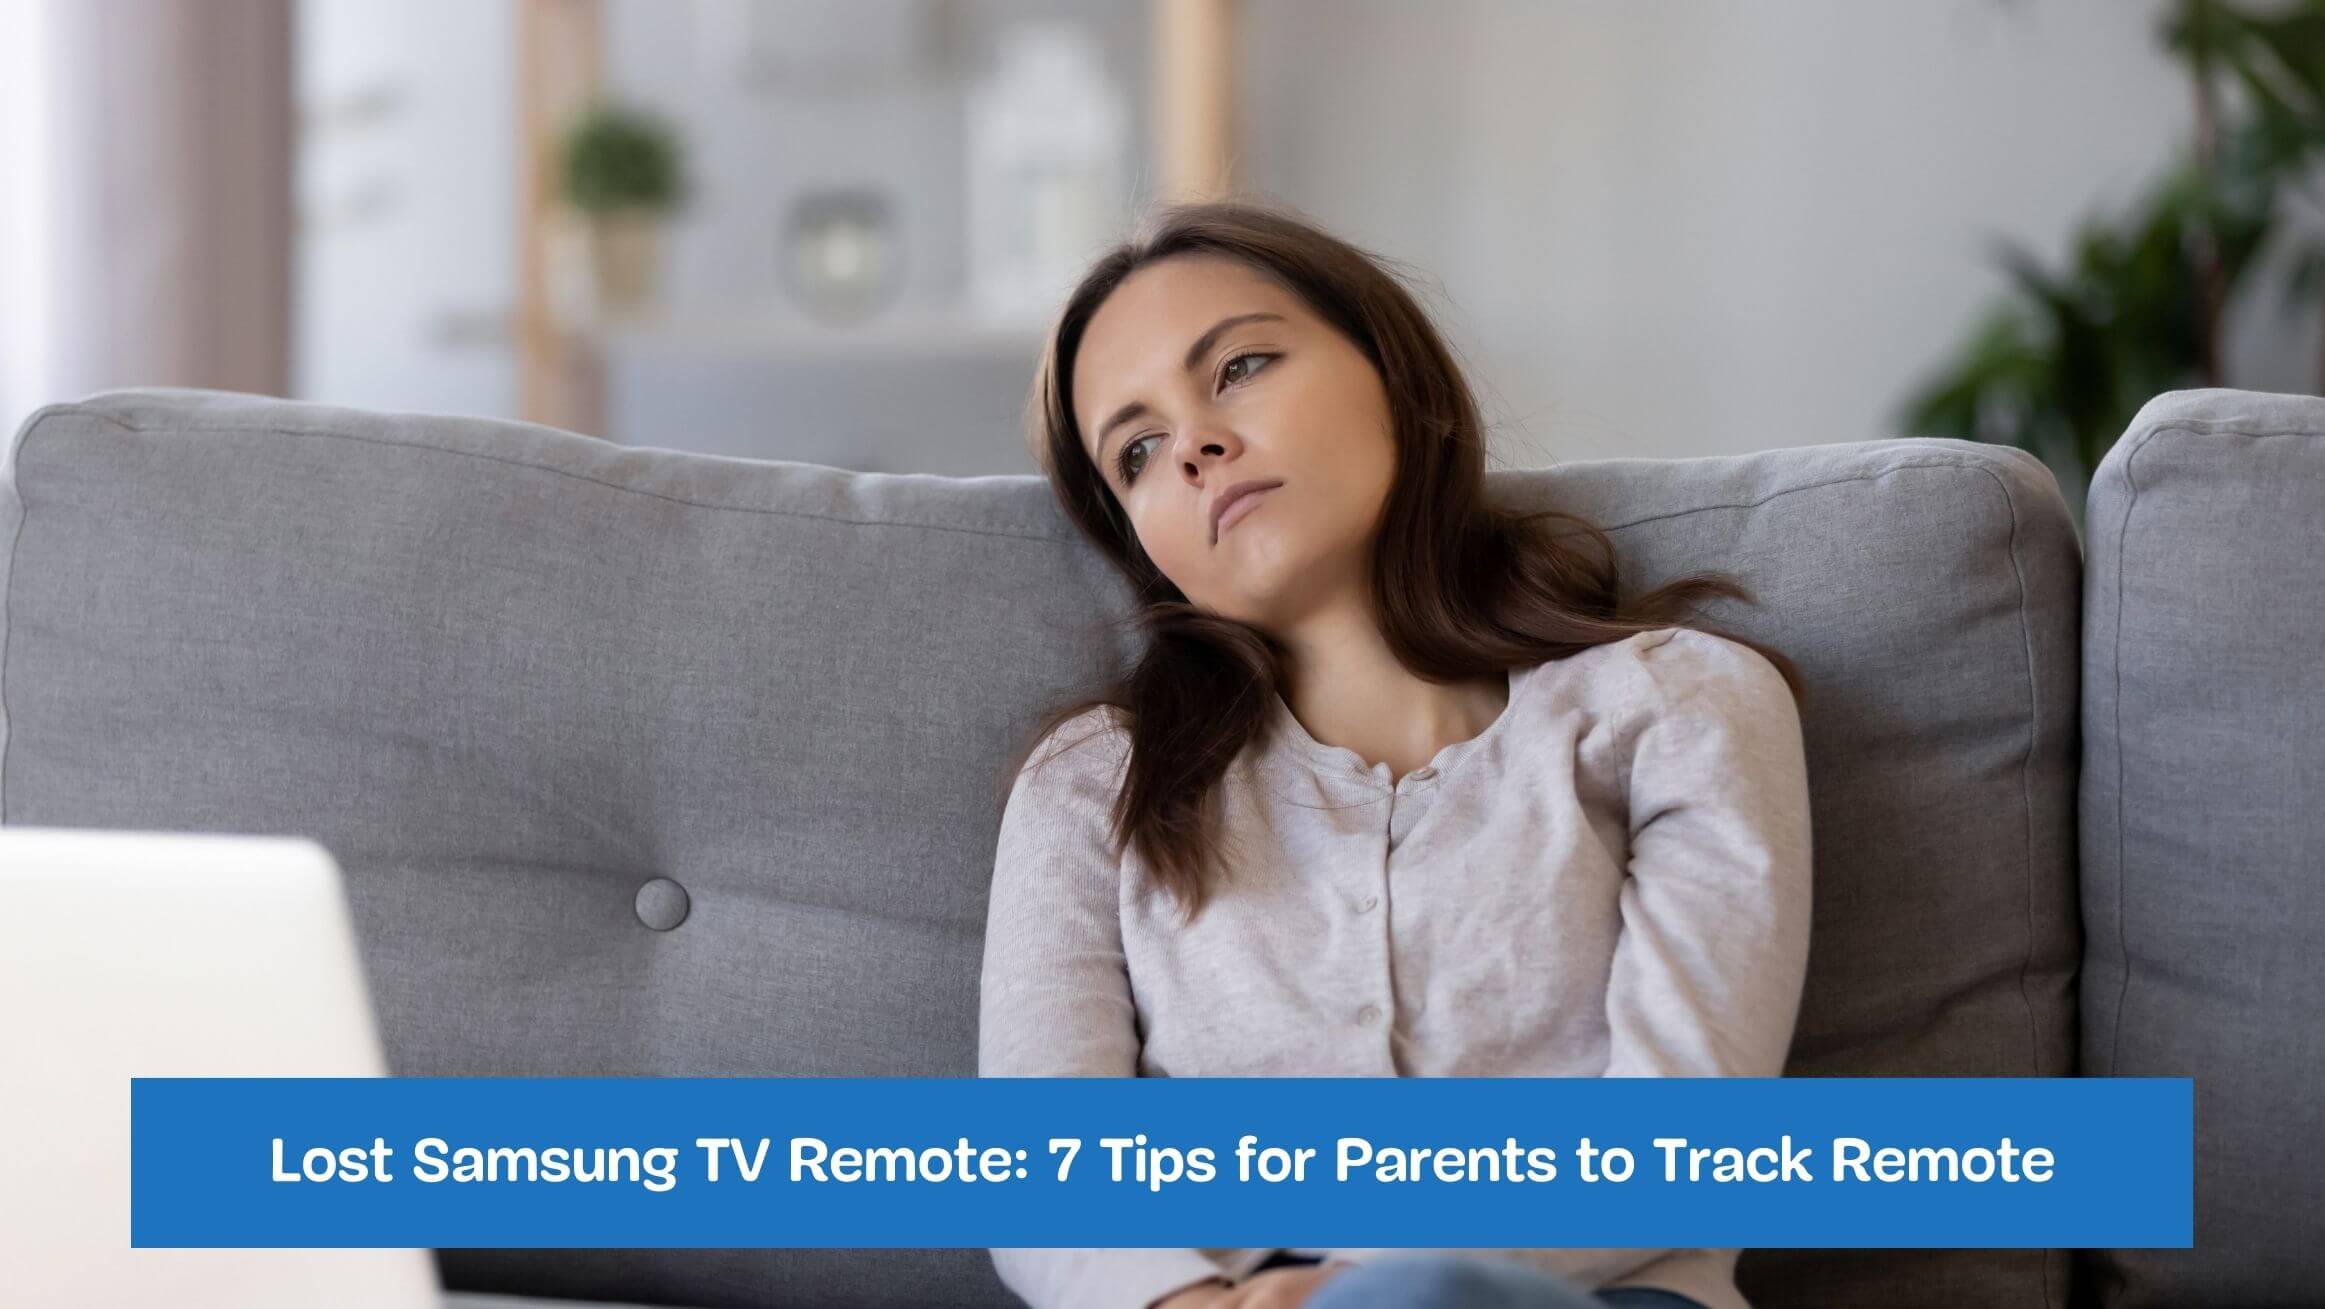 Lost Samsung TV Remote: 7 Tips for Parents to Track Remote